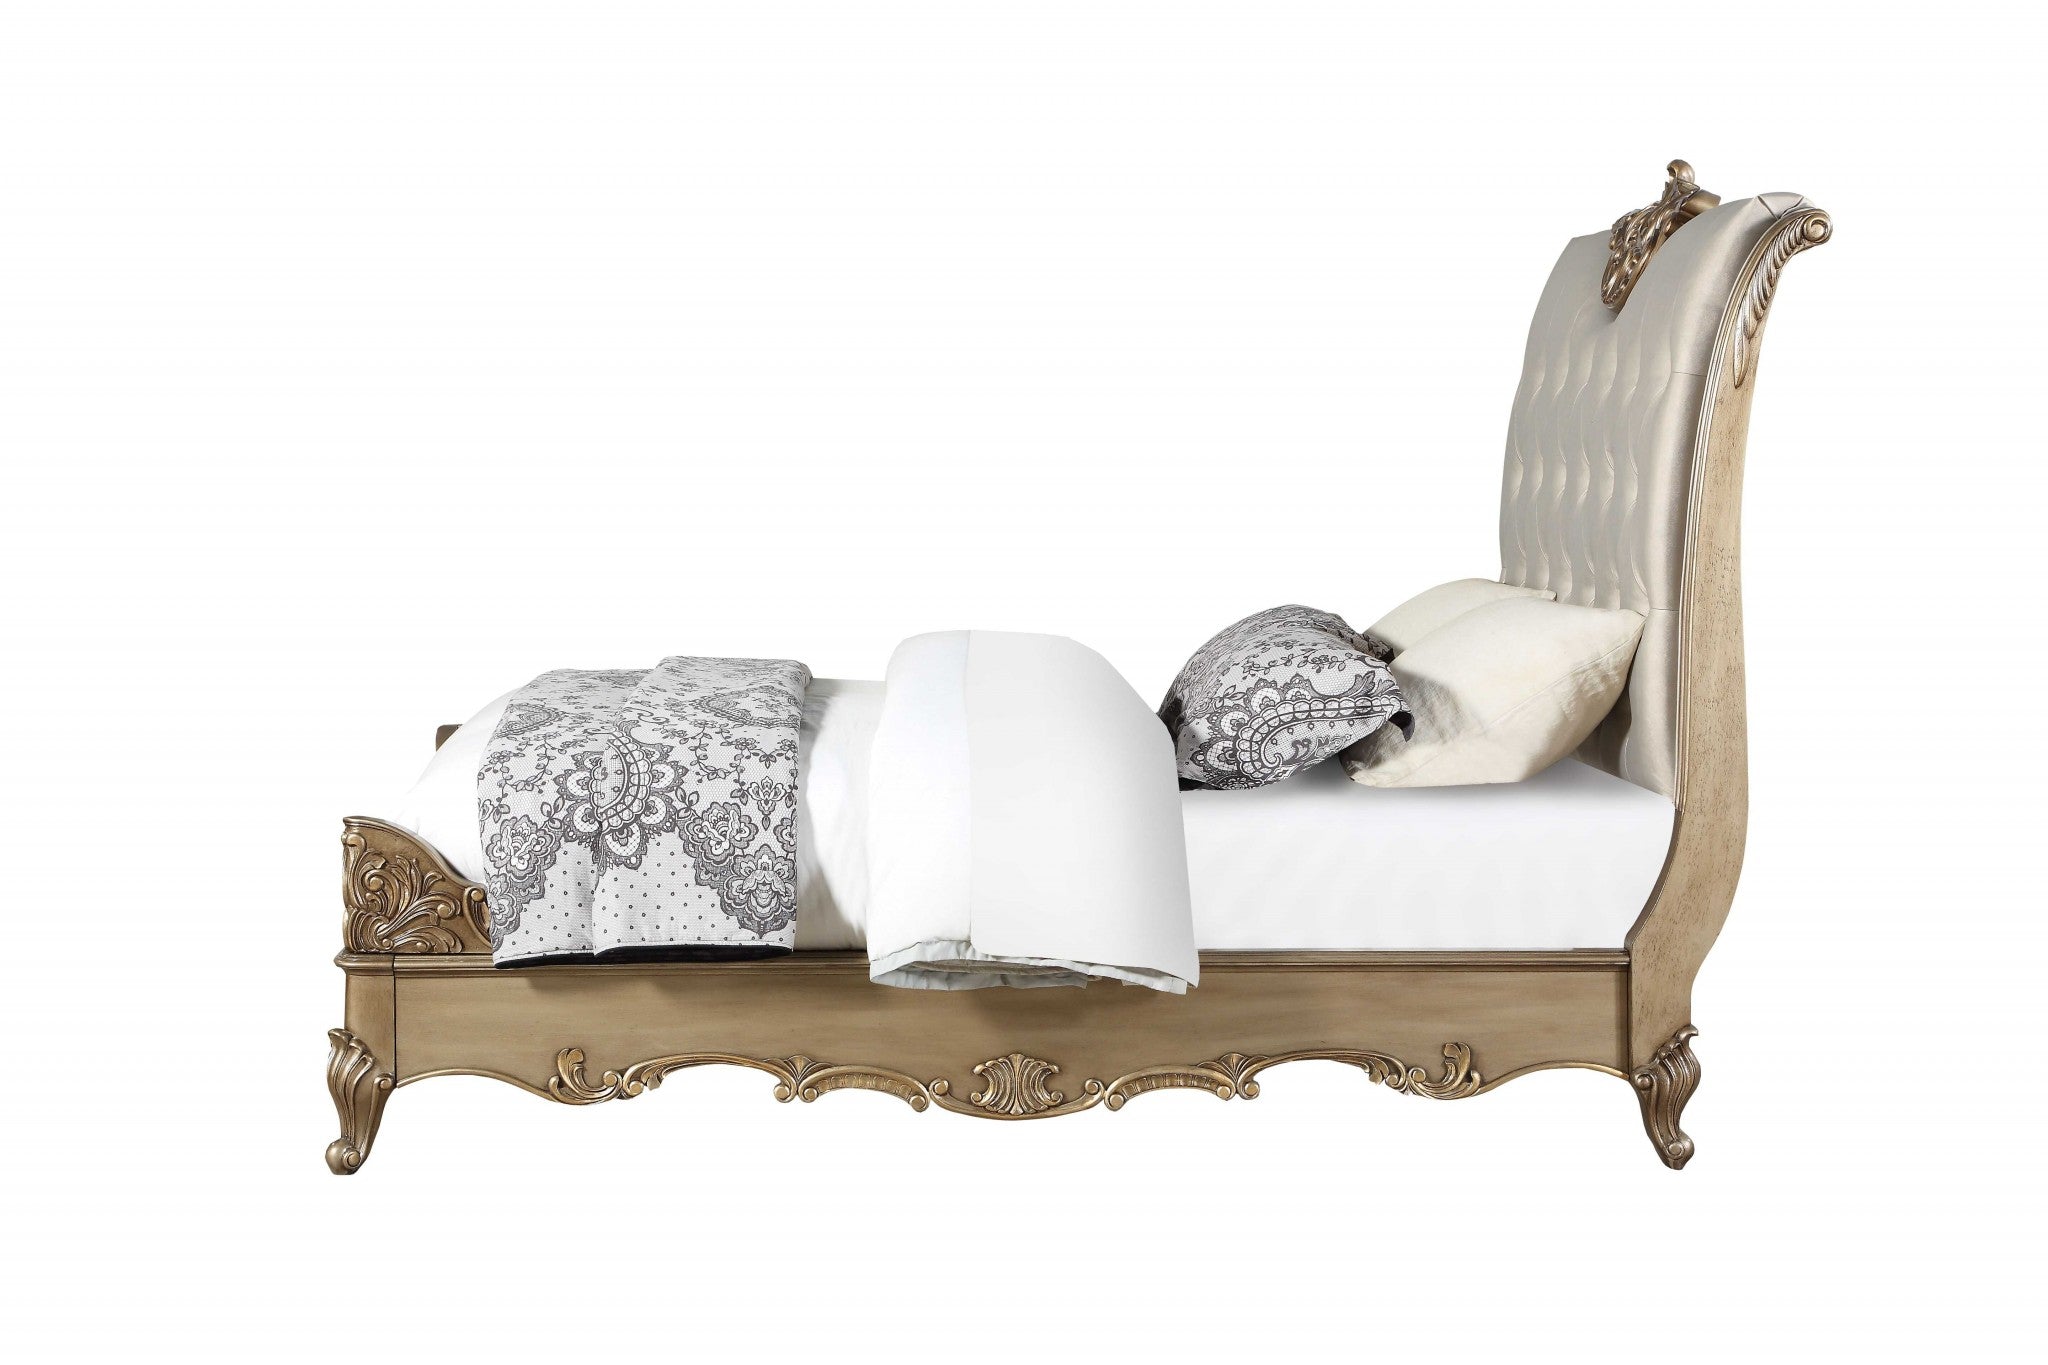 85" X 103" X 71" Champagne PU Antique Gold Wood Upholstered HB Eastern King Bed Default Title